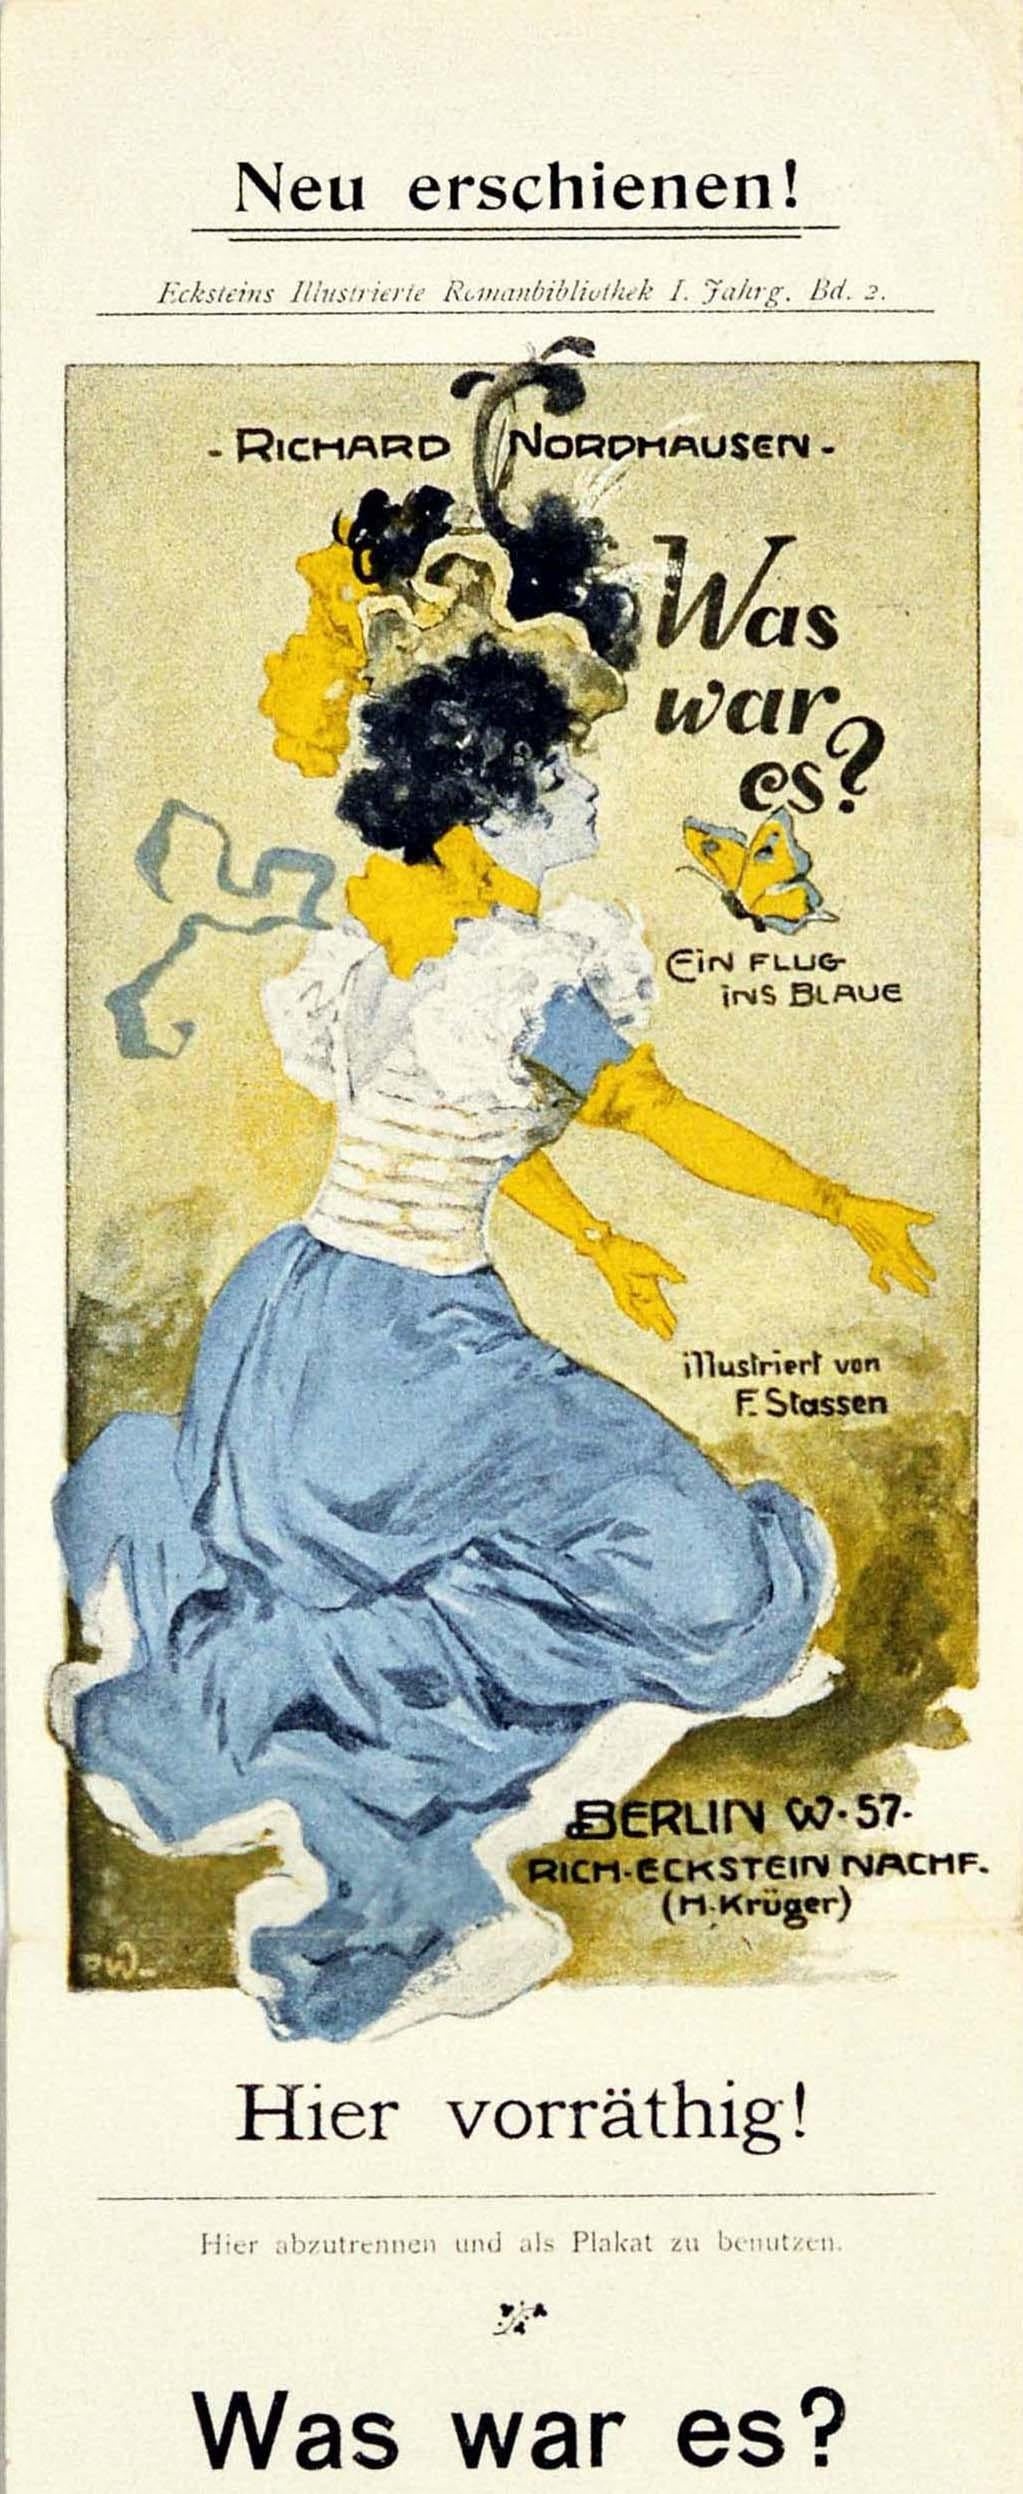 Original vintage advertising poster for a new book from Eckstein's Illustrated Novel Library entitled Was war es? Ein flug ins blaue - What Was It? A Flight Into The Blue by Richard Nordhausen (1868-1941), also known by the pseudonyms Max Kempff and